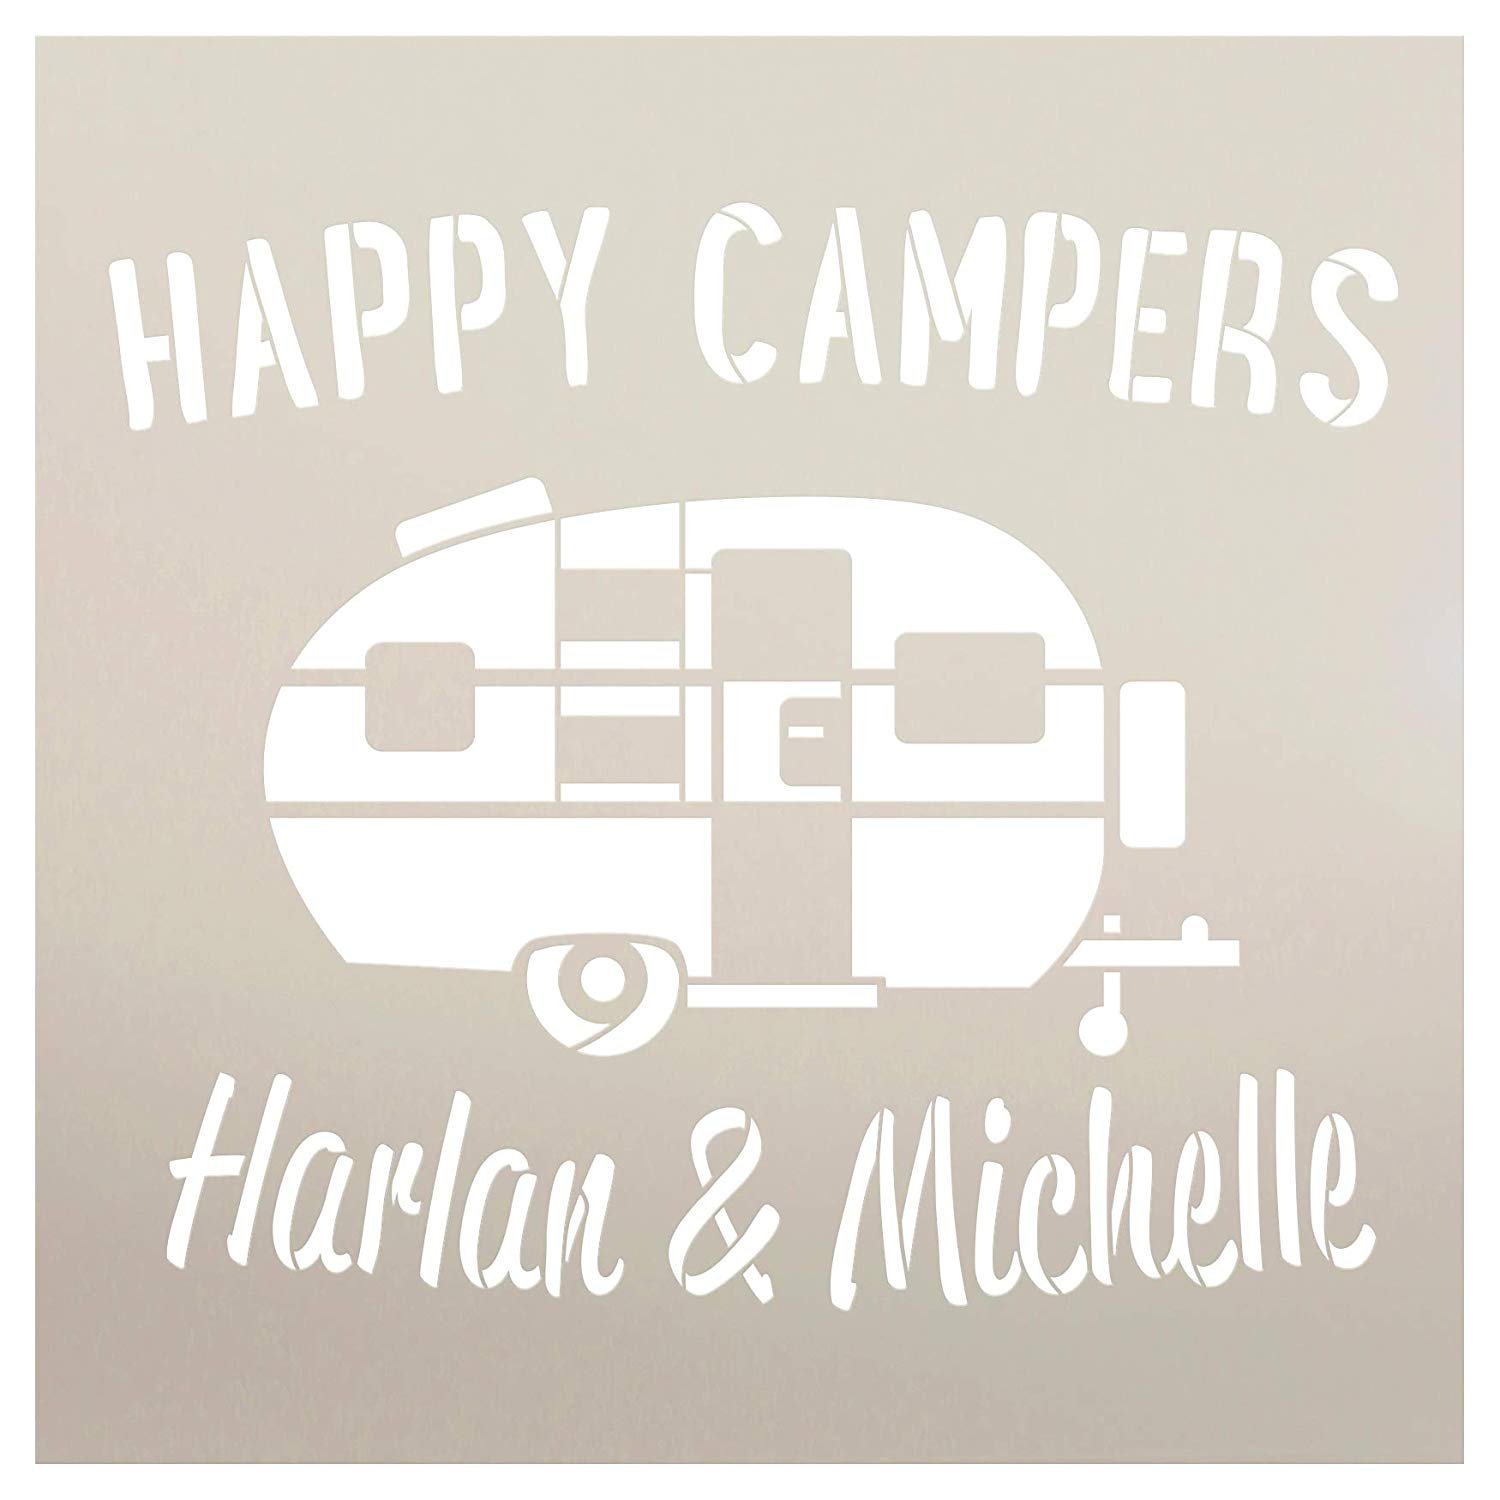 Personalized Happy Campers Stencil | Custom First or Last Names | DIY Fun Retro Camping Decor | Family Outdoor Vintage Word Art | Craft & Paint Wood Signs | Reusable Mylar Template | Select Size